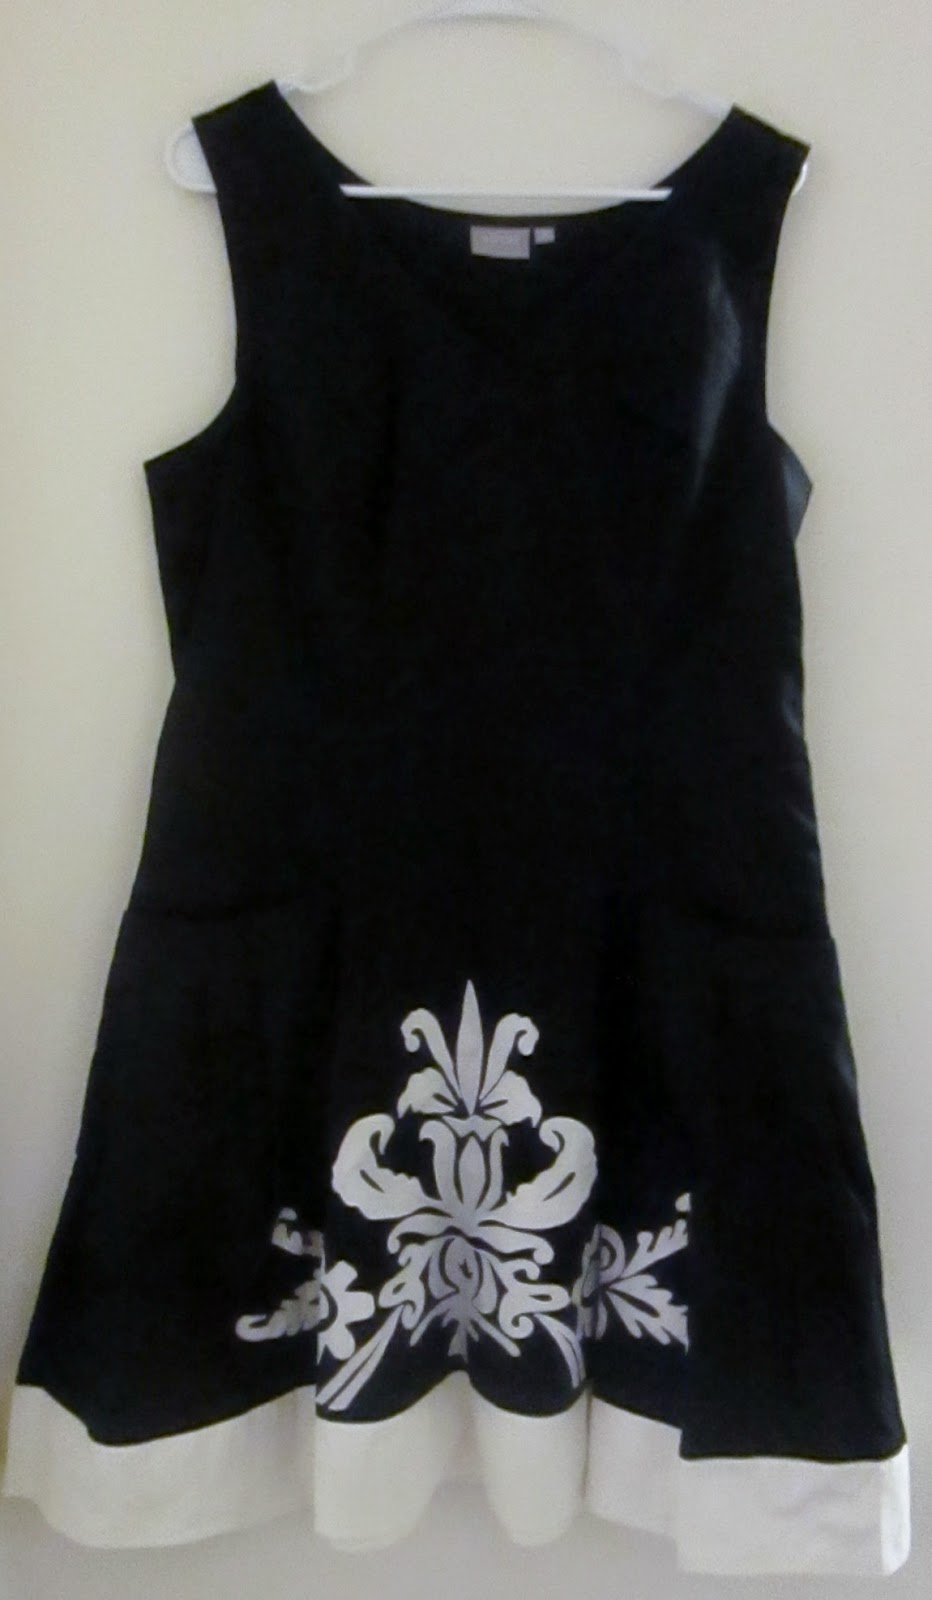 Styling a black and white dress for a Christmas Party - Eshakti.com ...